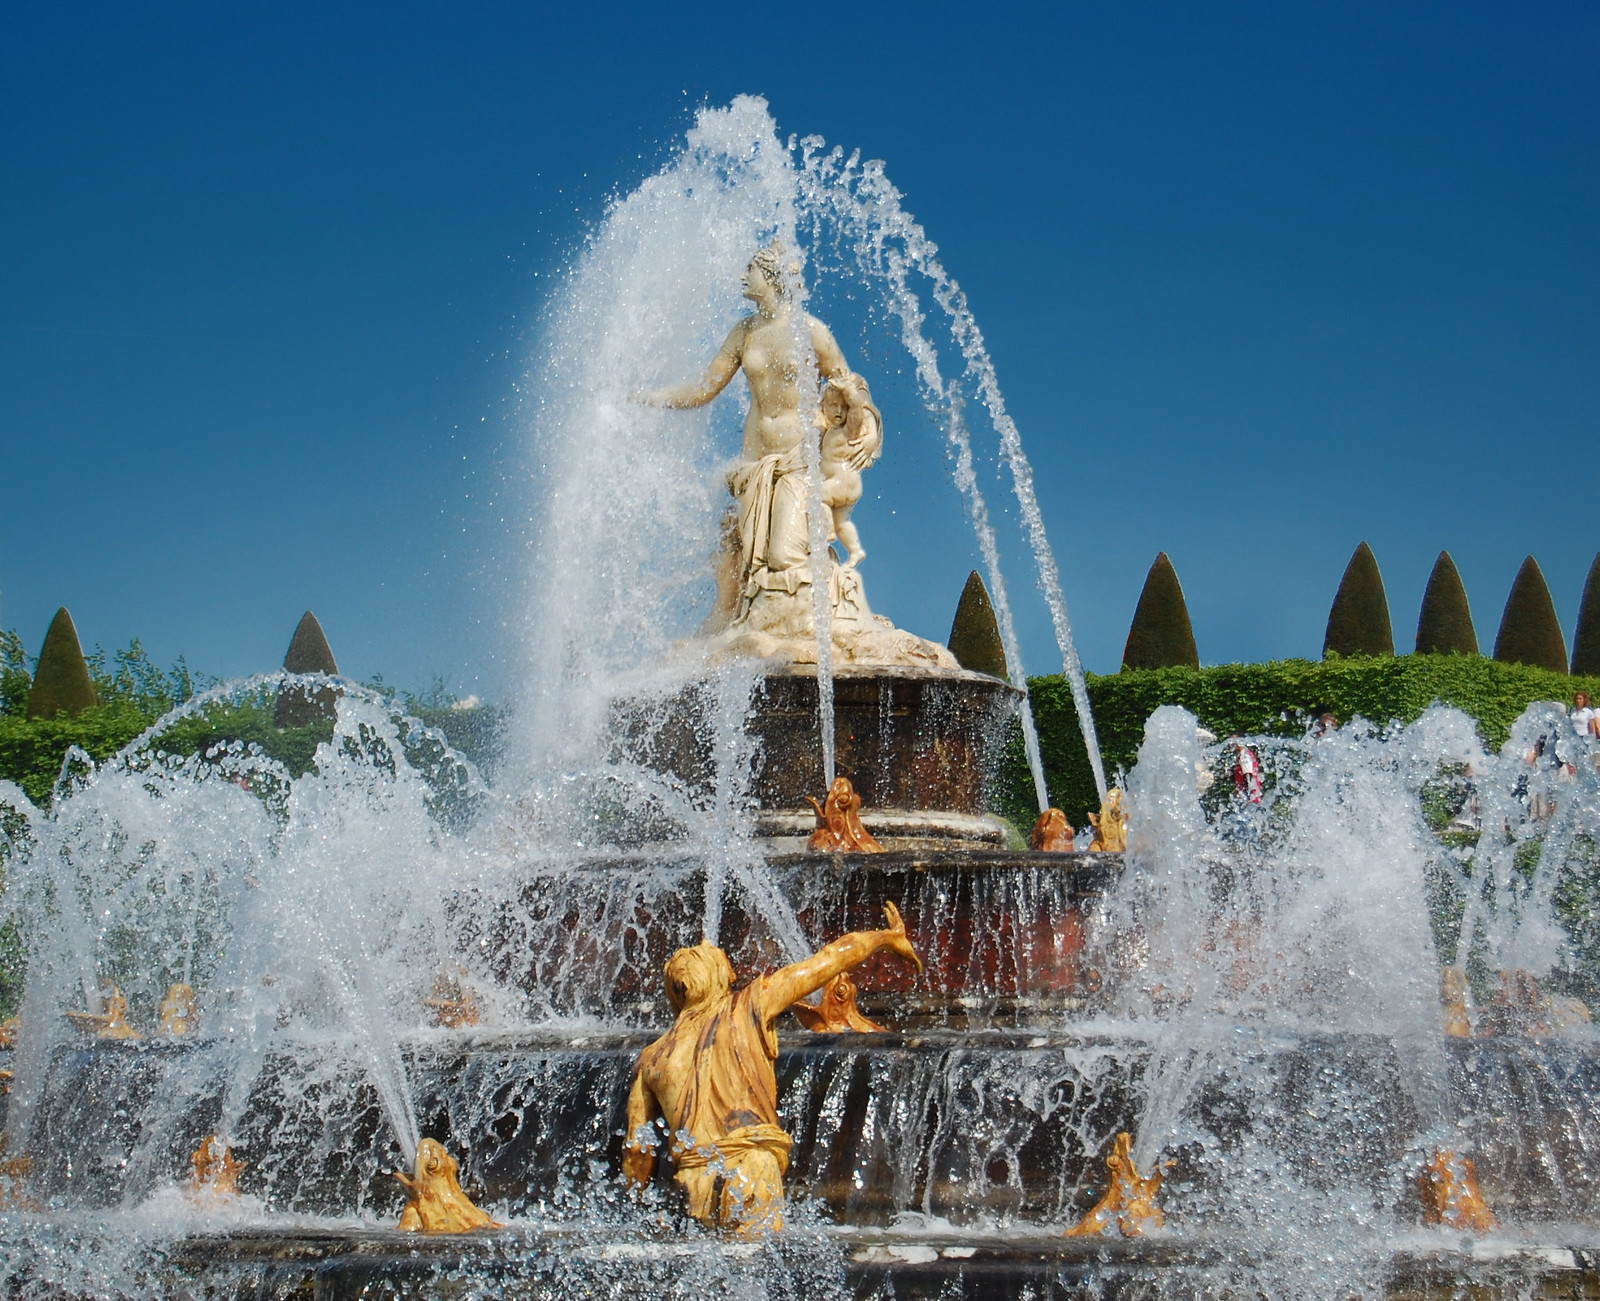 Fountain in the Gardens of Versailles. Credit edwin.11